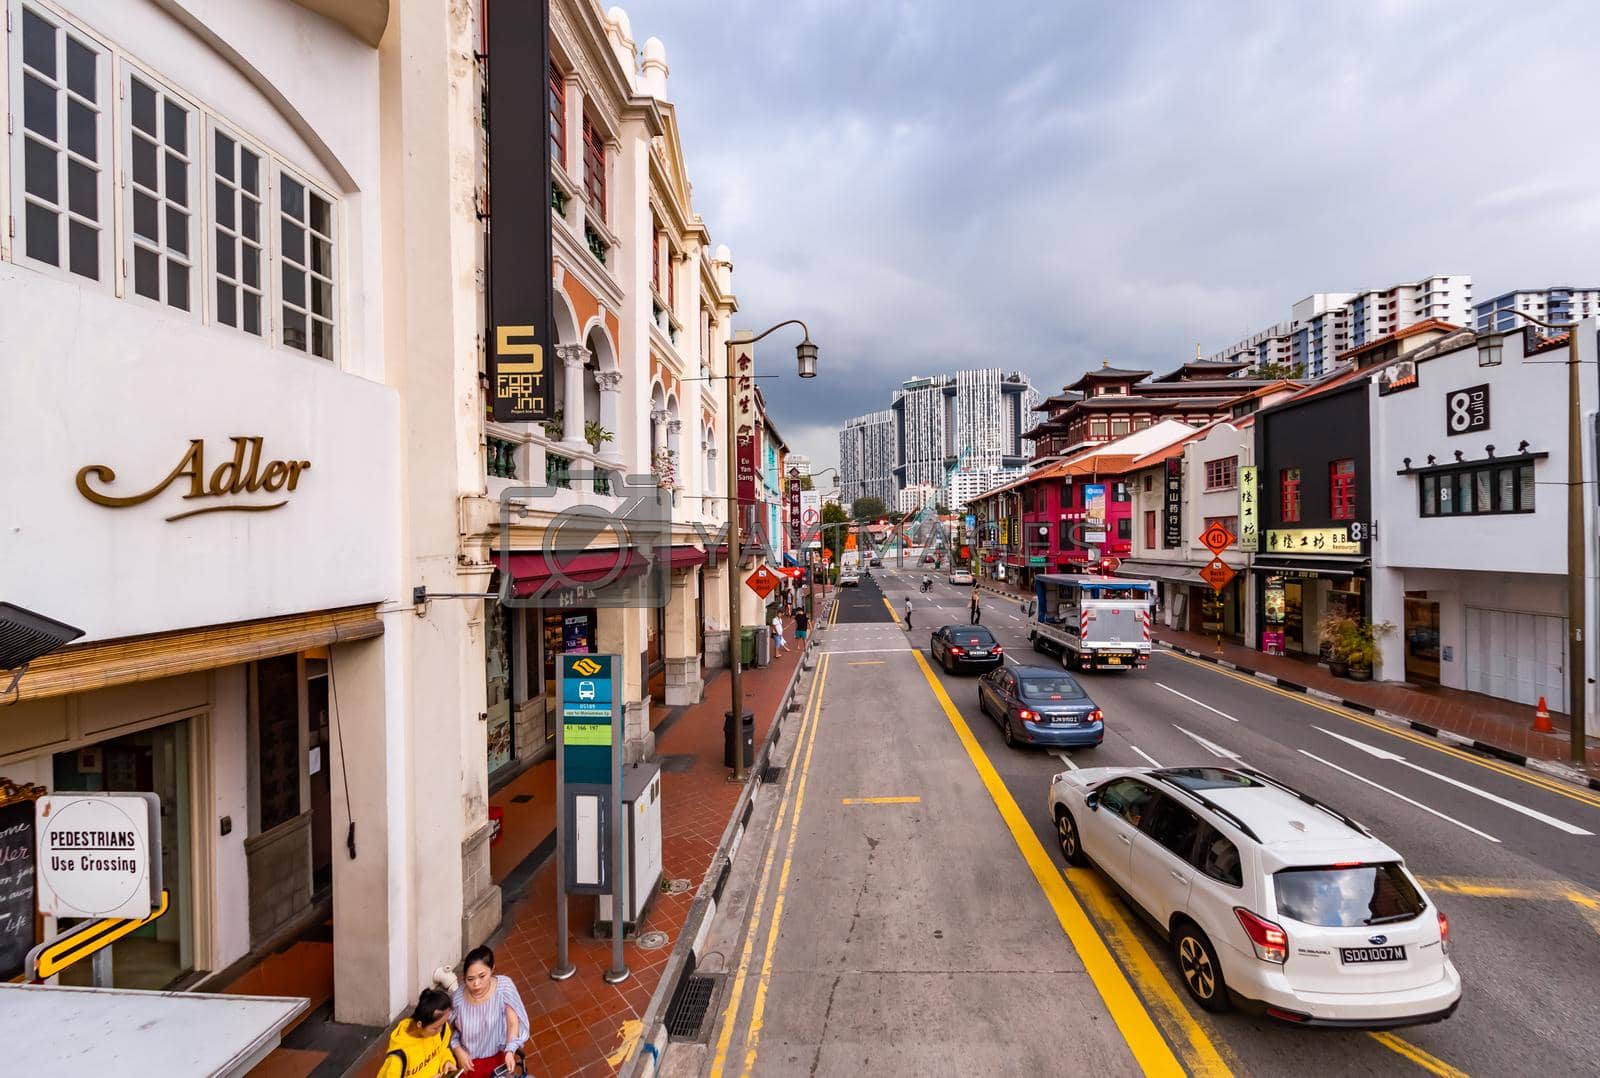 Malaysia, Singapore, 26 March 2018: Singapore's old town in cloudy weather, street with small houses, grocery stores and cafes. High quality photo